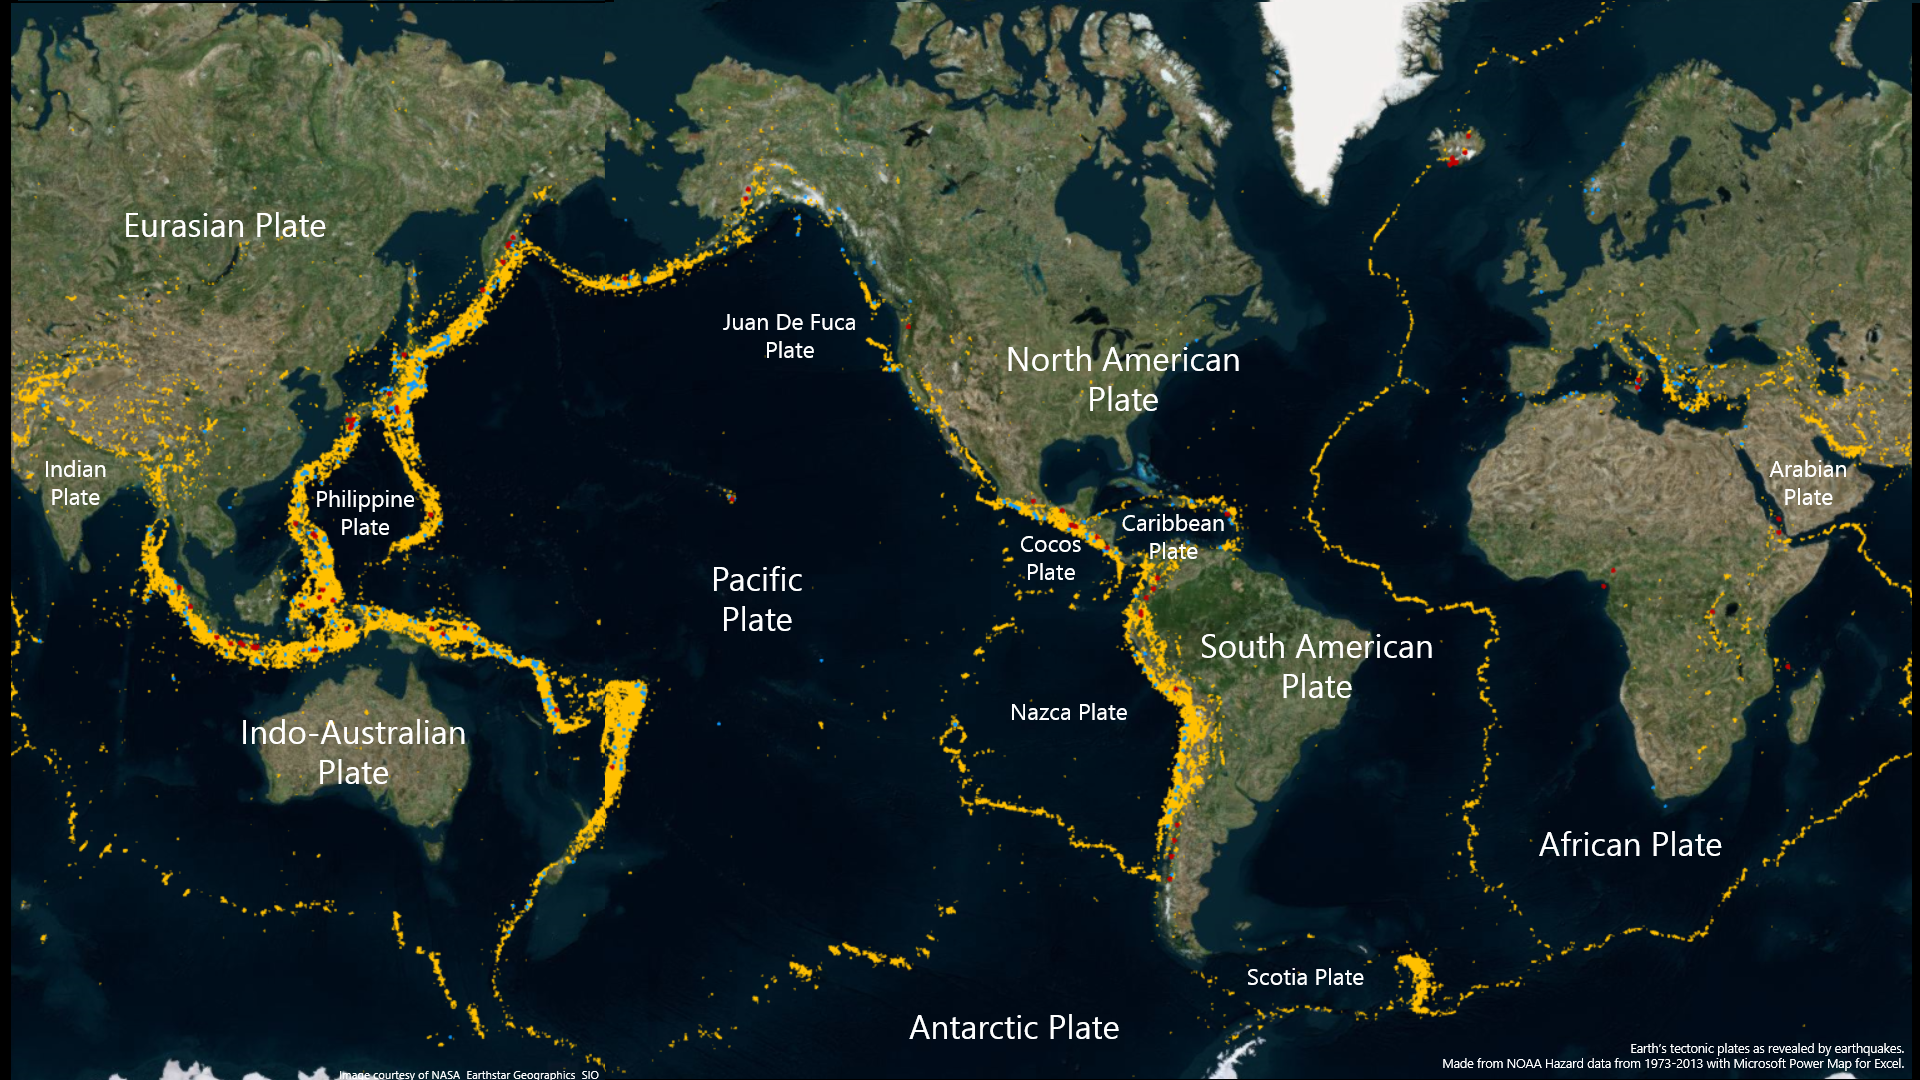 Earth's tectonic plates as revealed